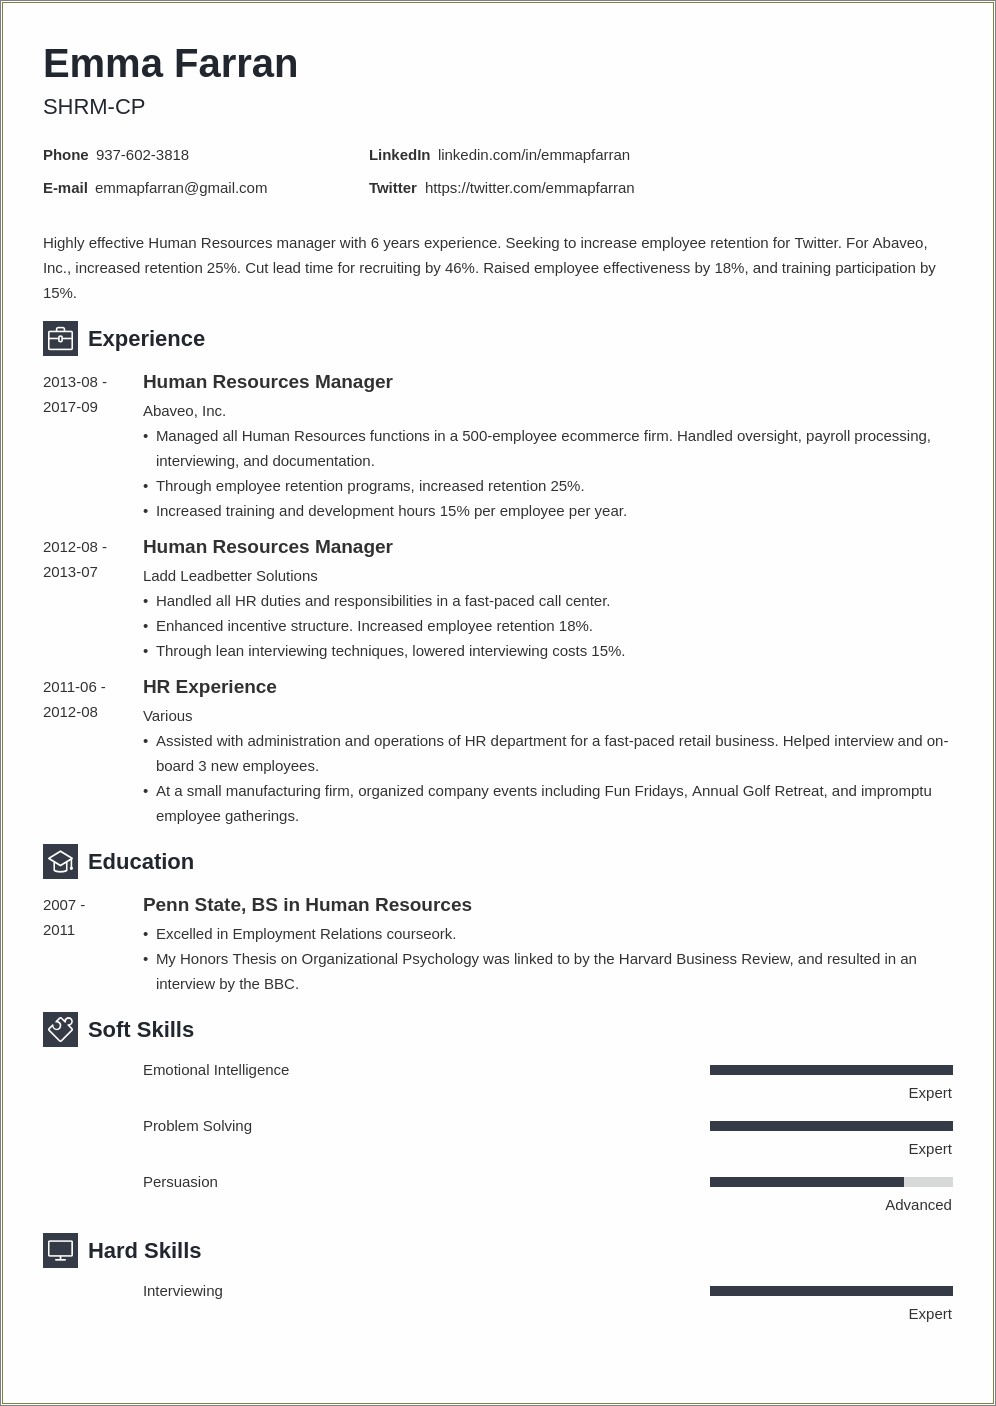 Professional Summary For Resume Examples Human Resources Resume